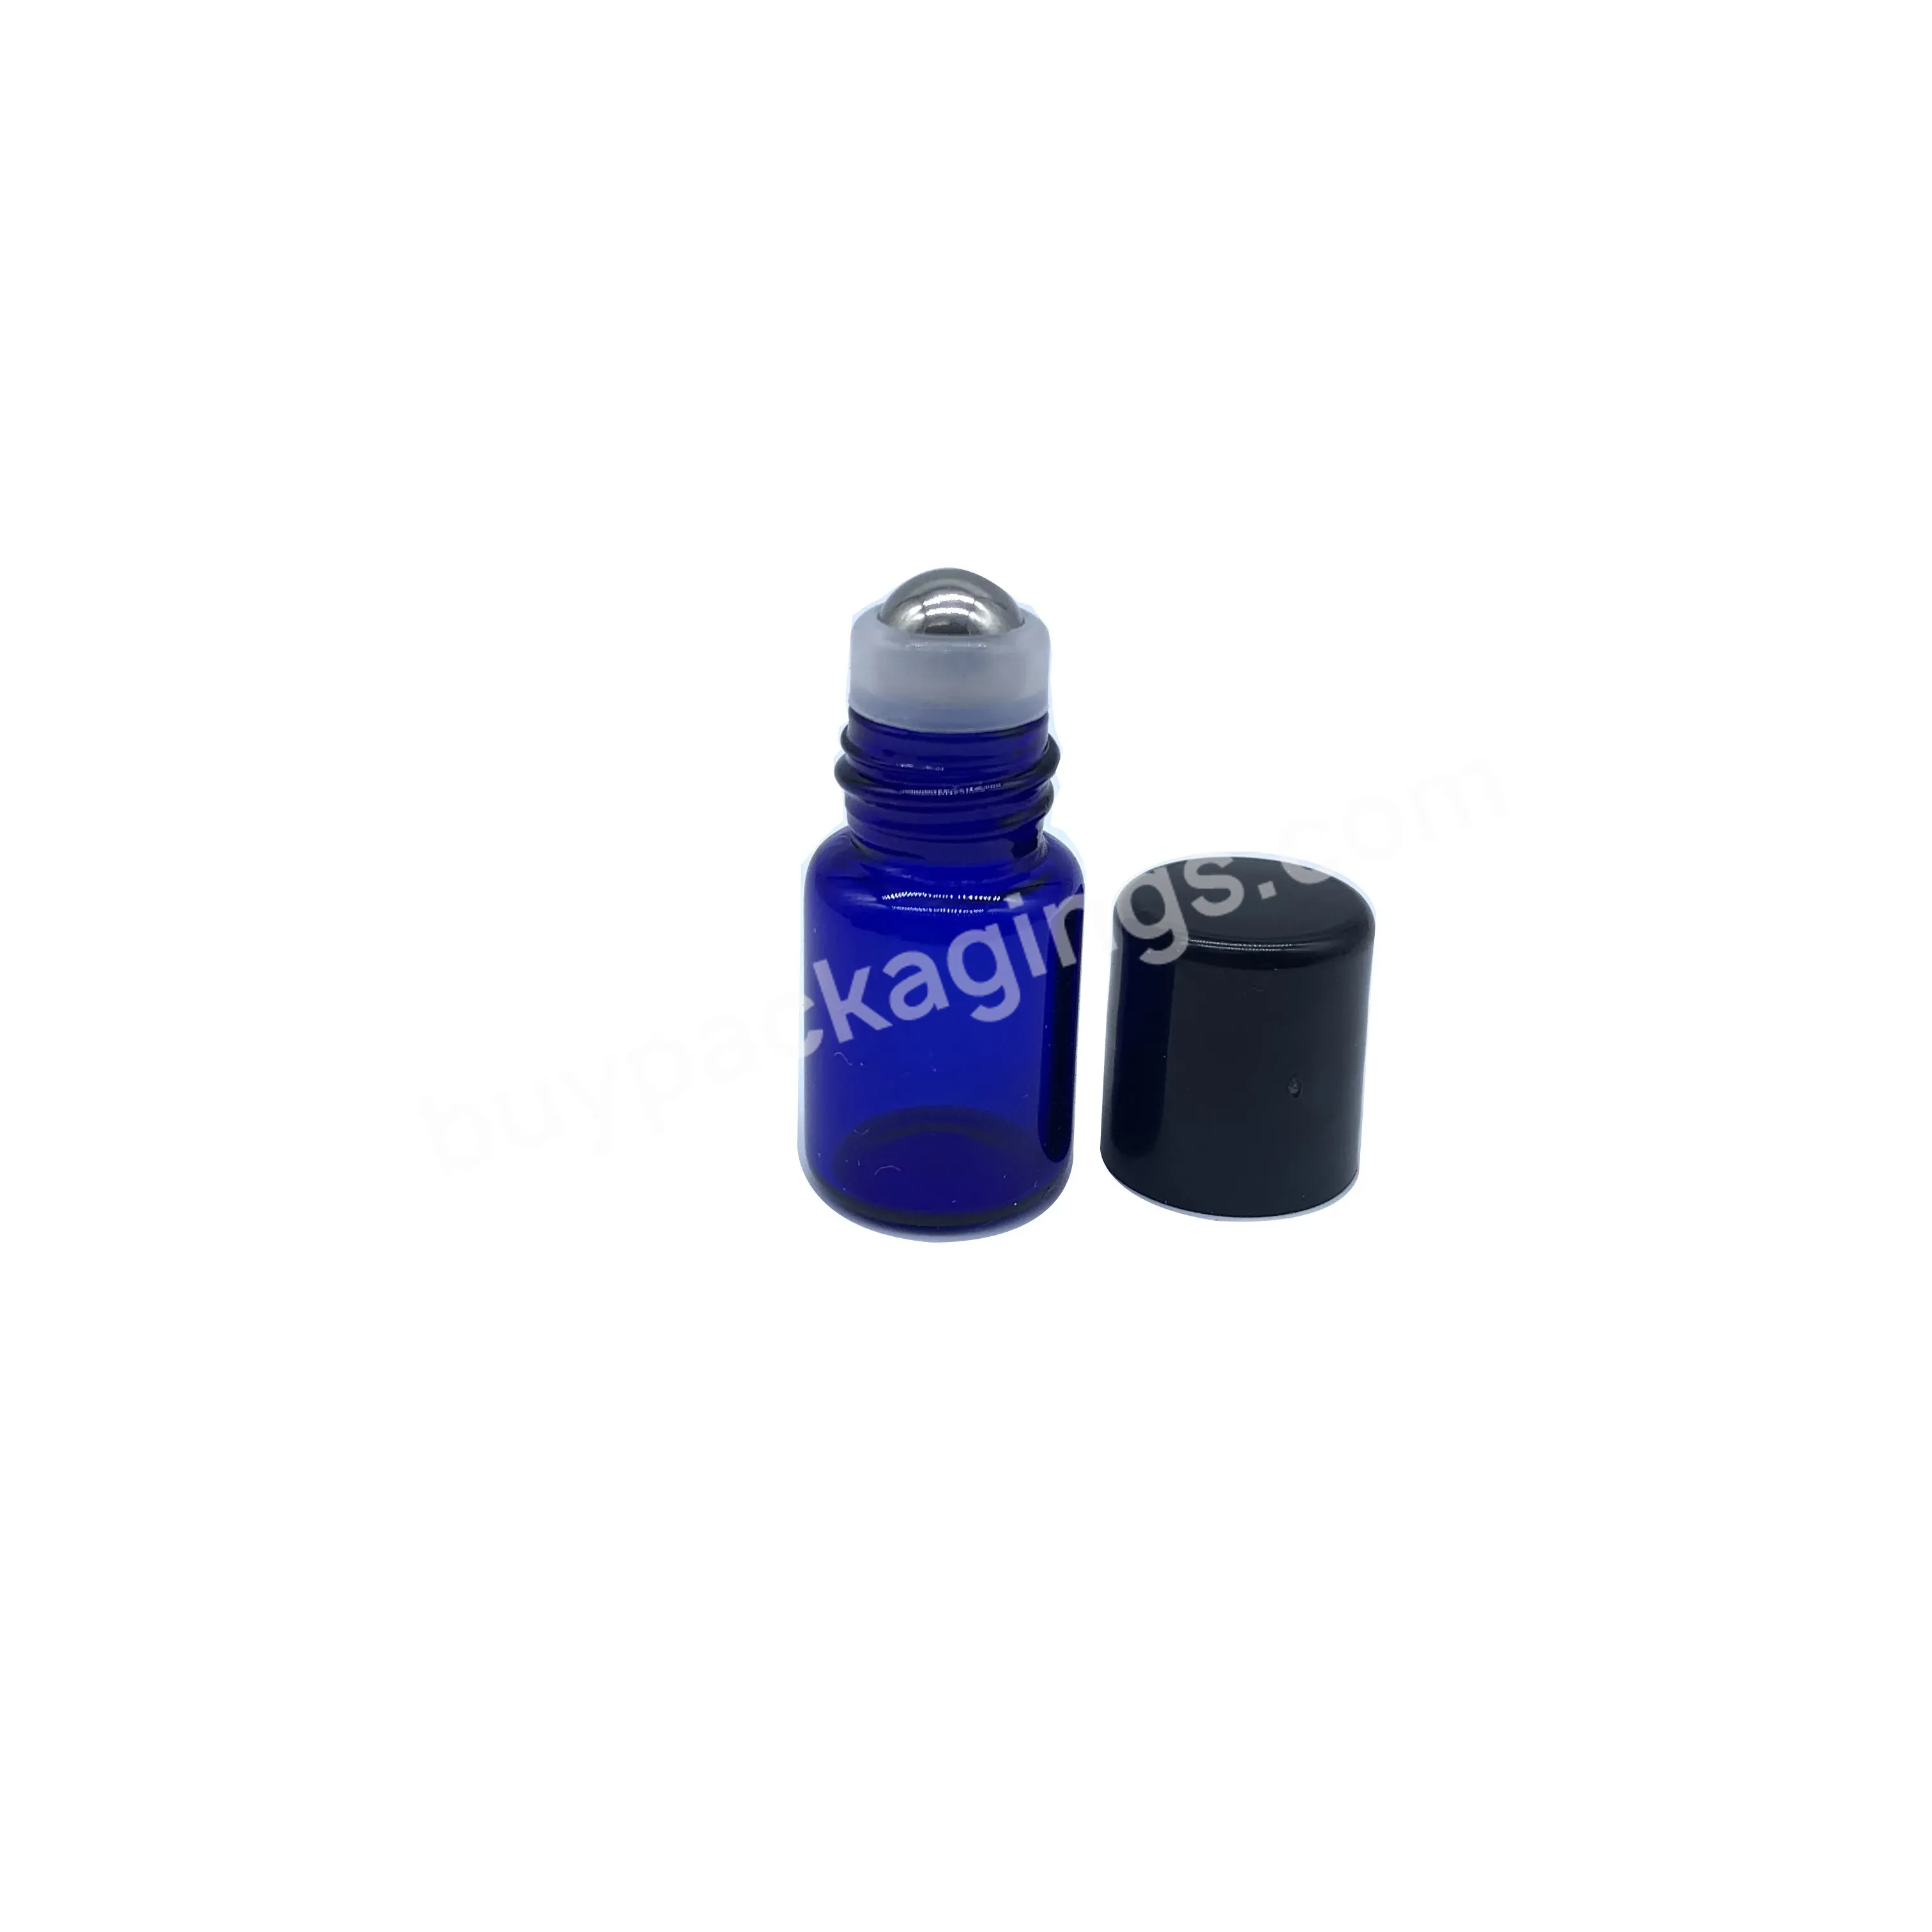 2ml Cobalt Blue Empty Mini Glass Essential Oil Perfume Bottle With Metal Roller And Plastic Black Cap - Buy Mini Cute Blue Glass Essential Oil Bottle,2ml Mini Roll On Glass Bottle With Metal Roller,Blue Glass Bottles With Cap For Essential Oil.